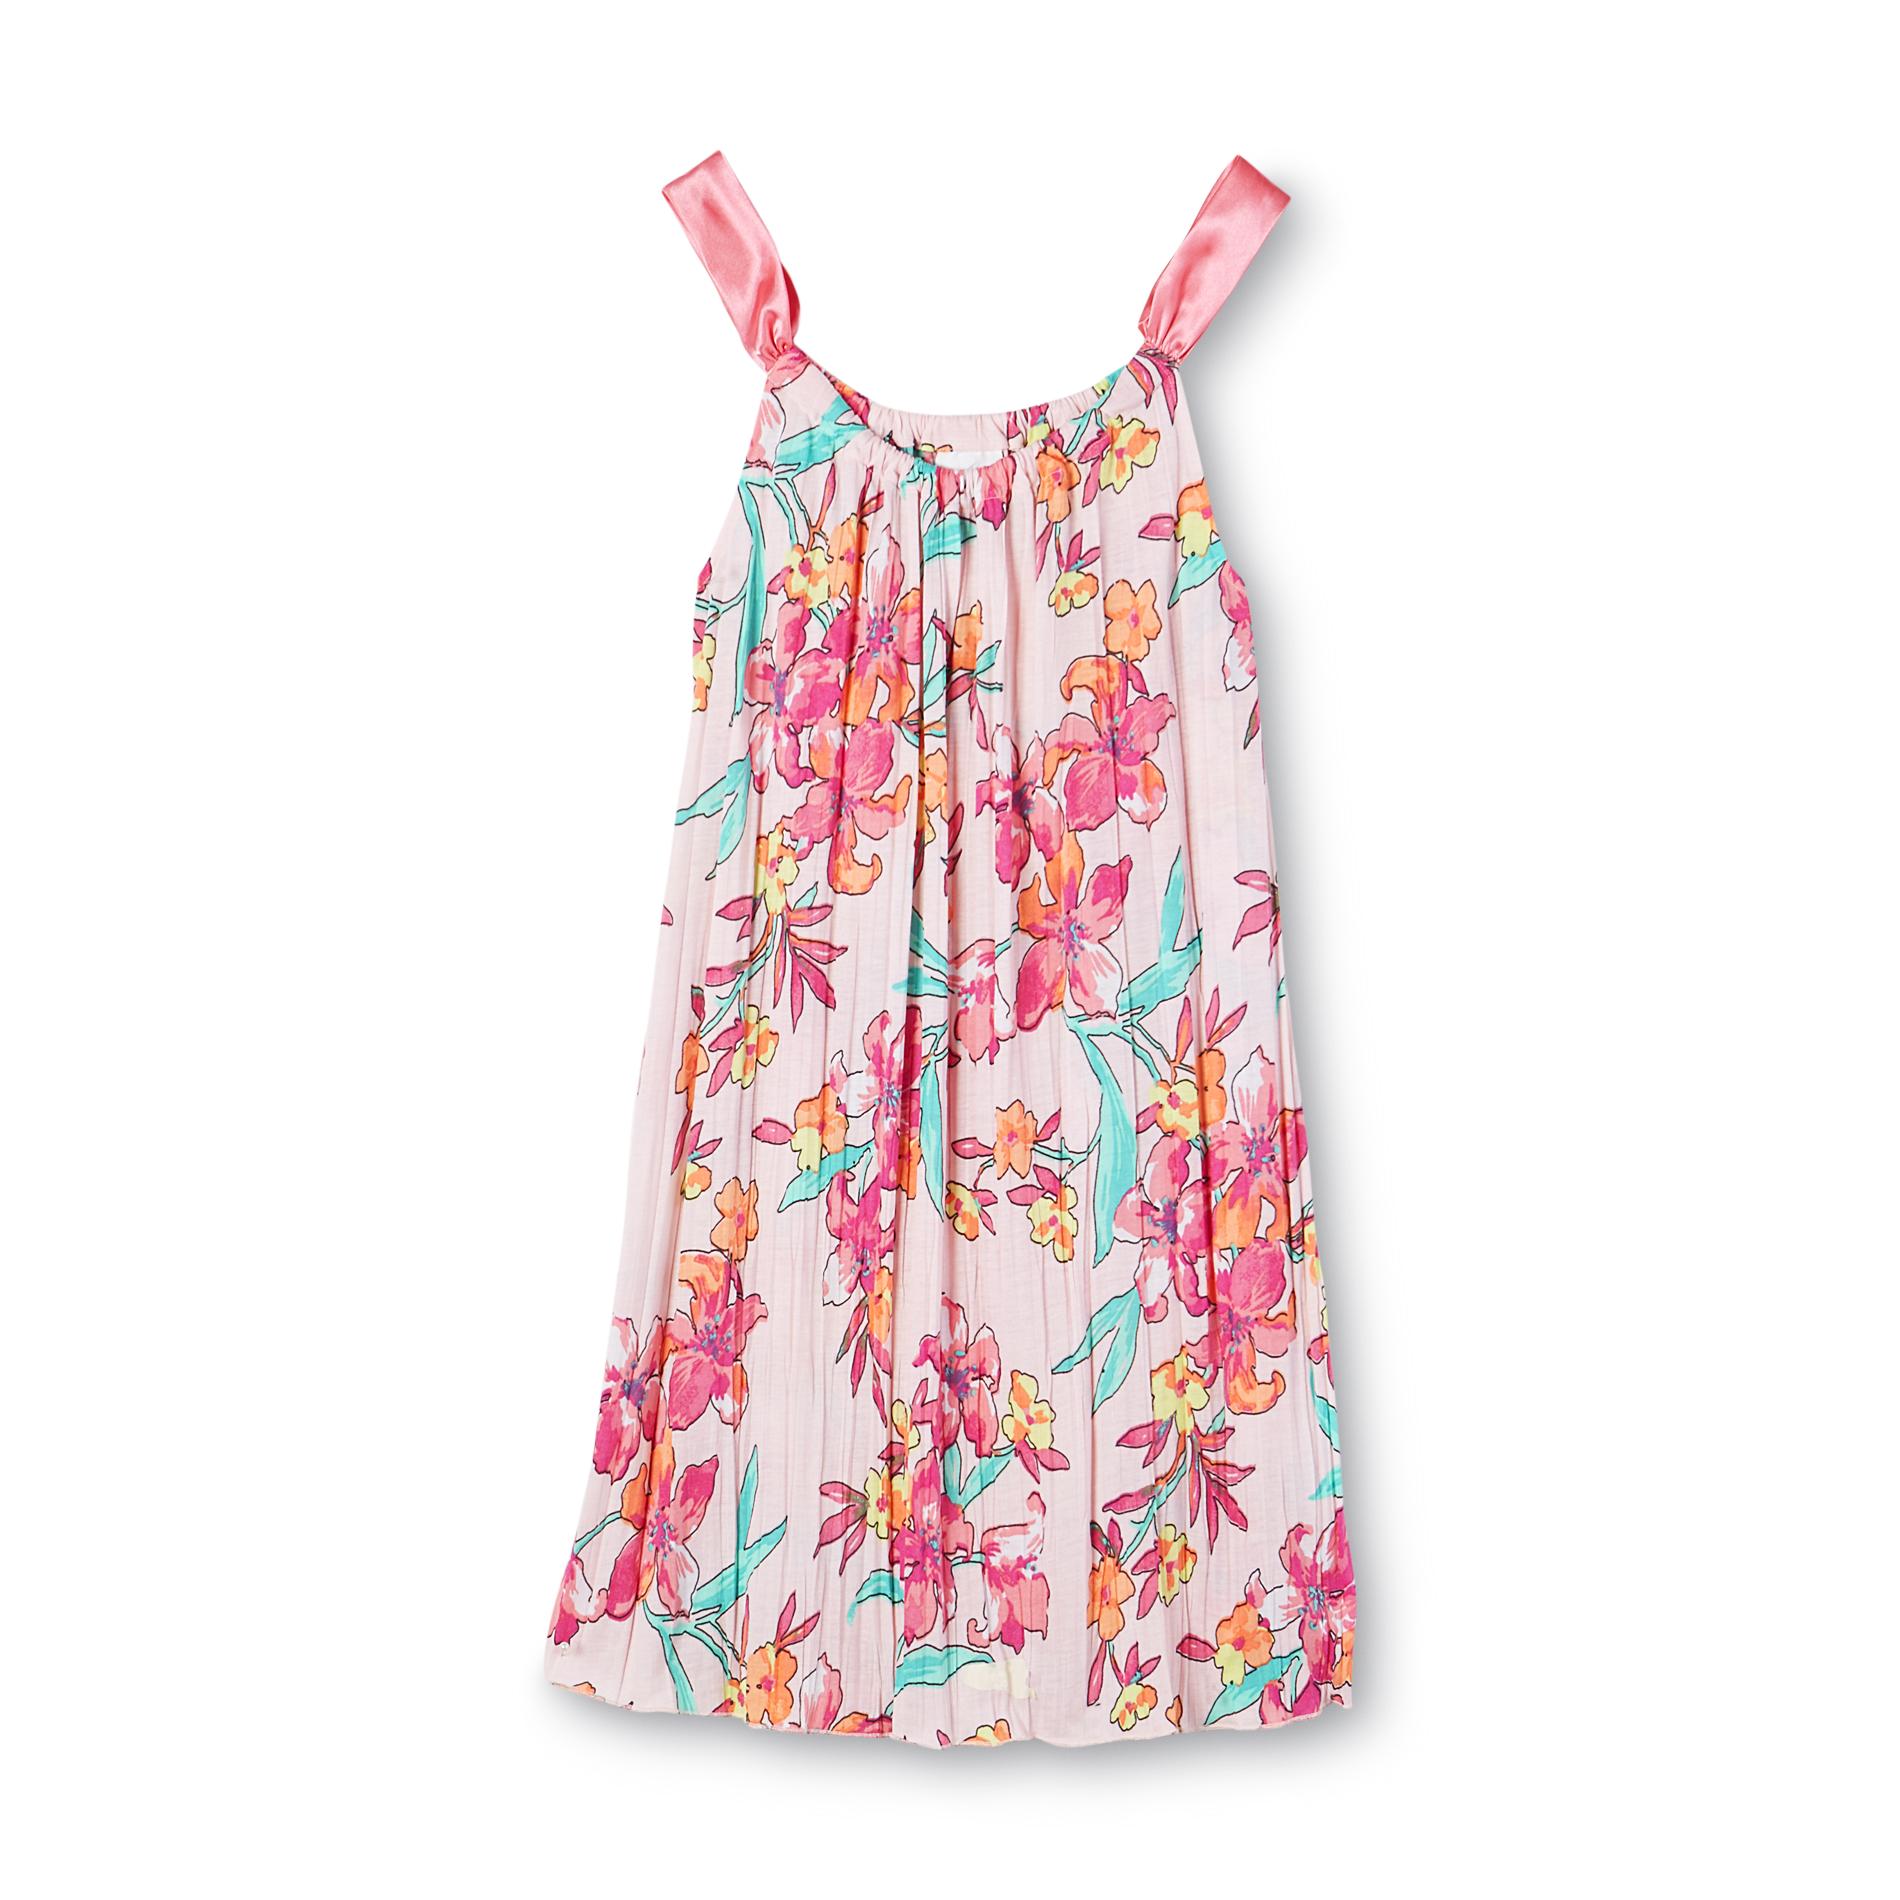 Jaclyn Smith Women's Sleeveless Crinkle Nightgown - Floral